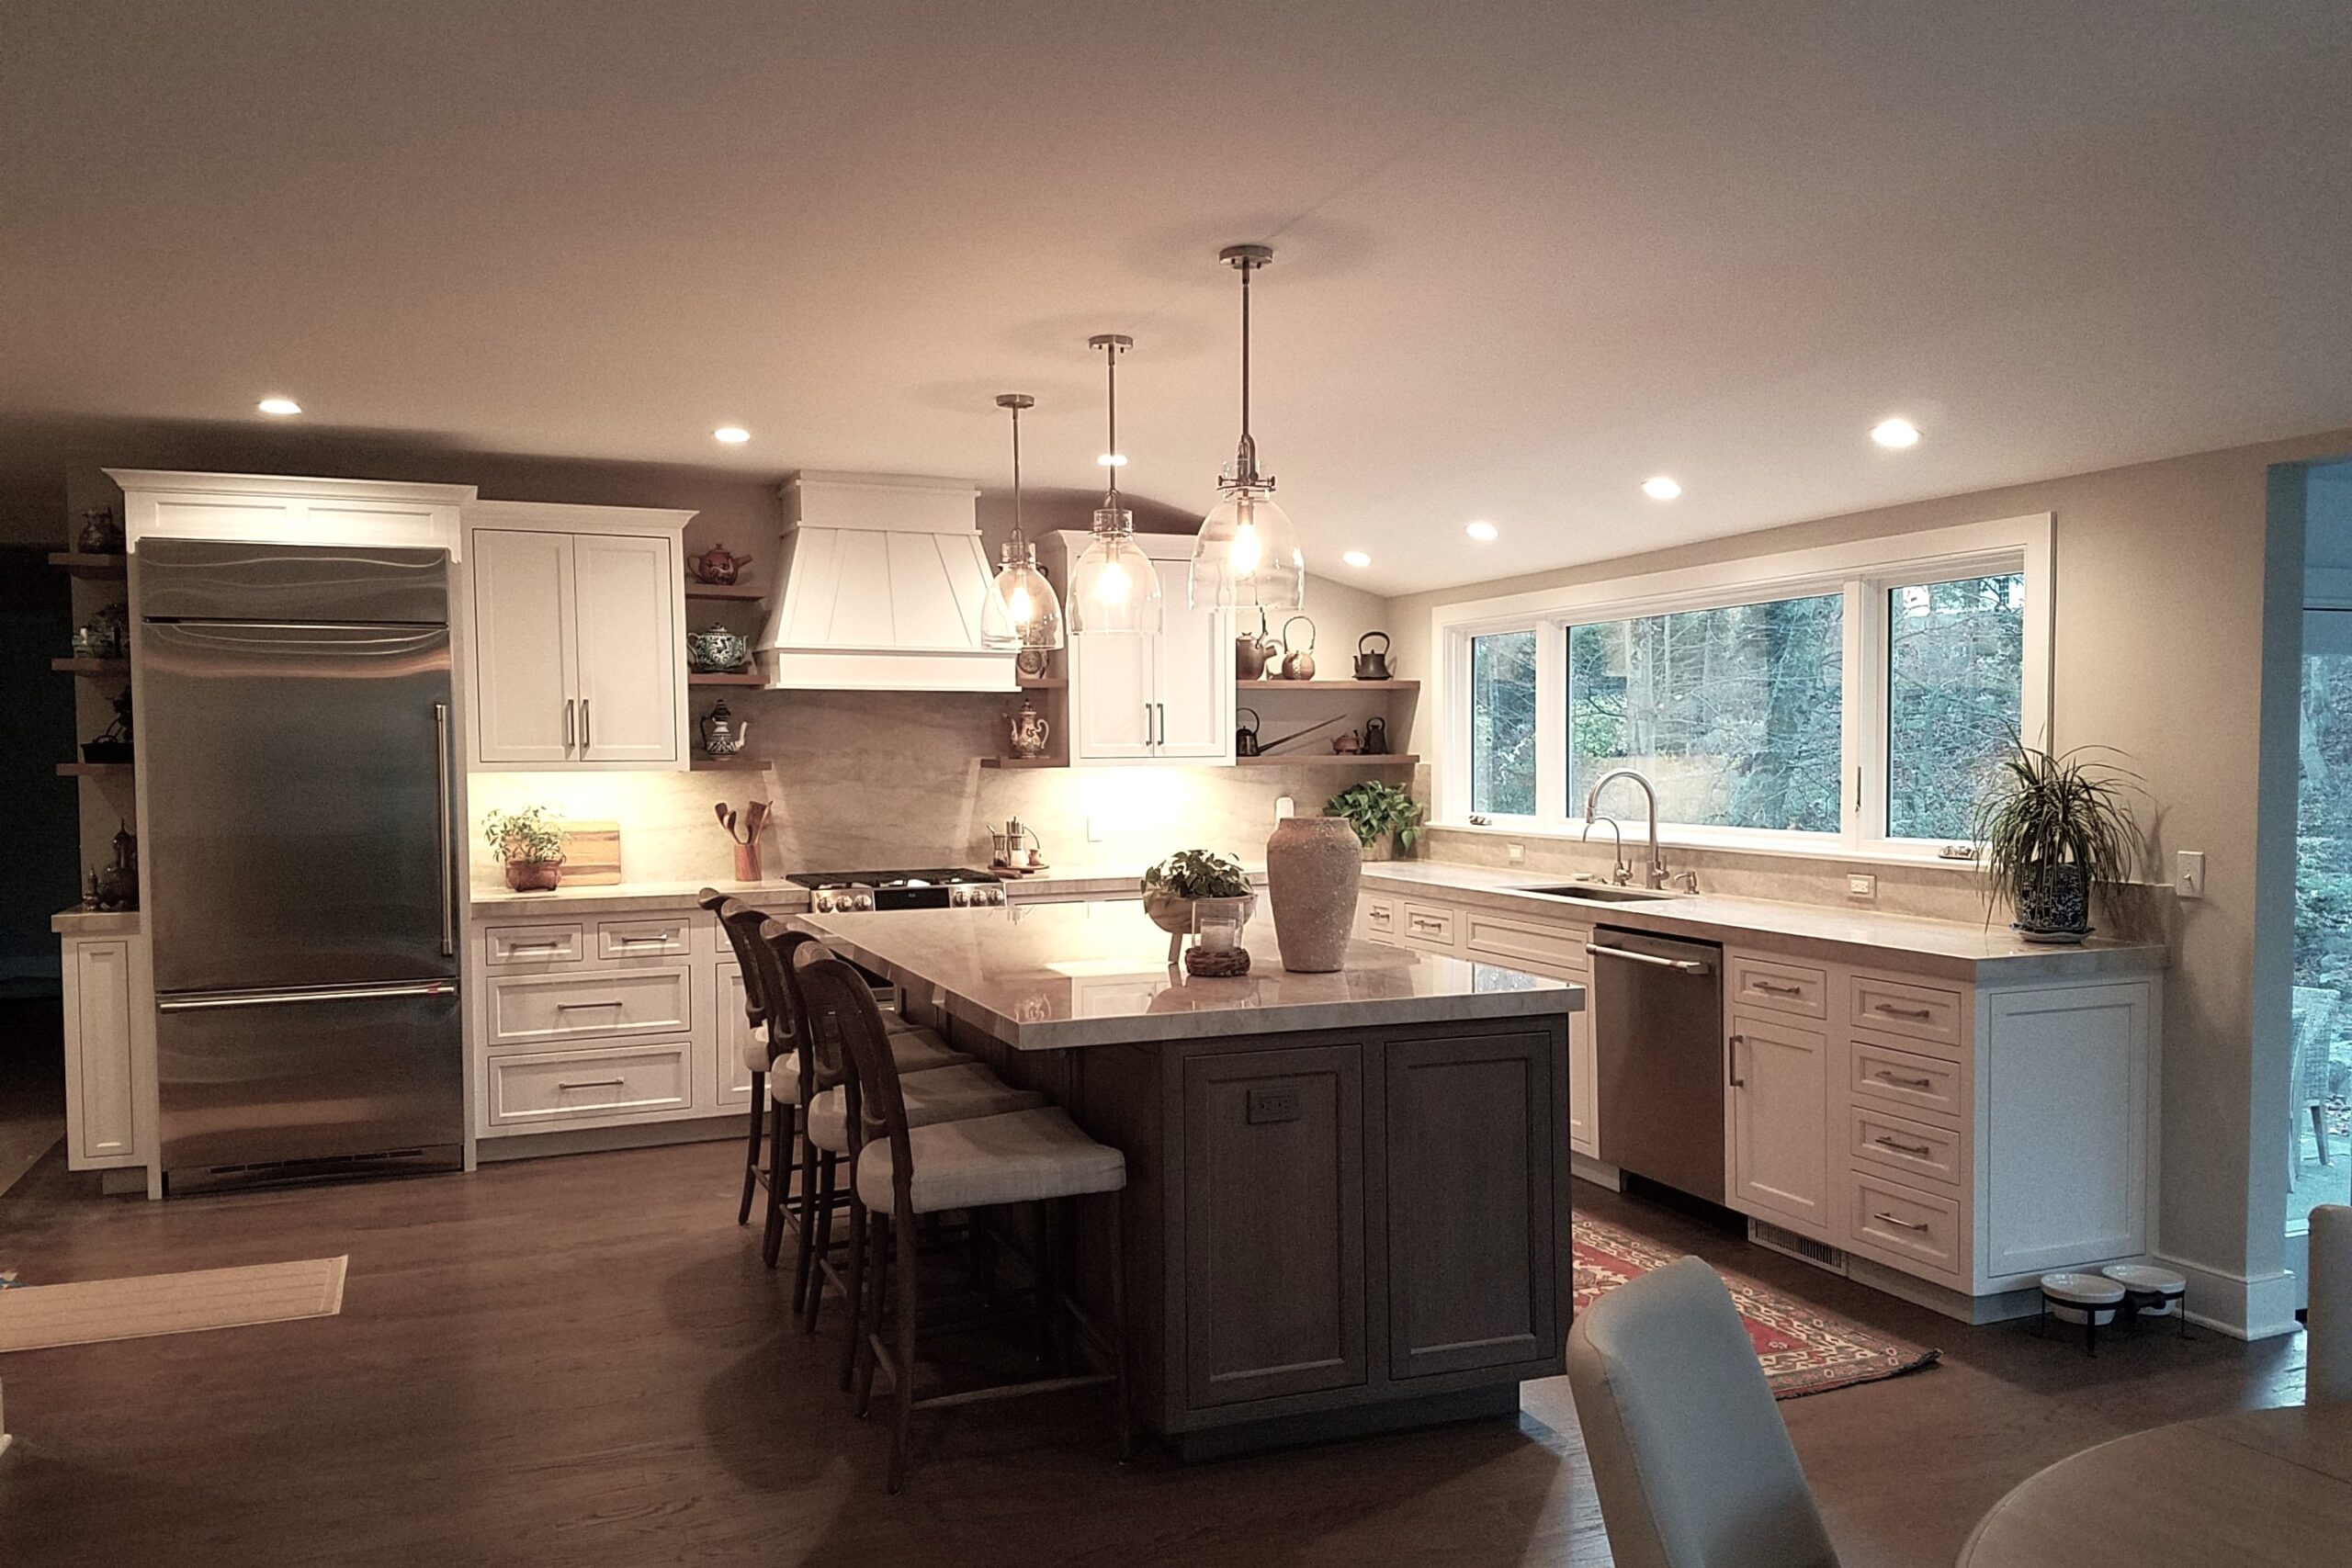 Modern kitchen with white countertops and center island